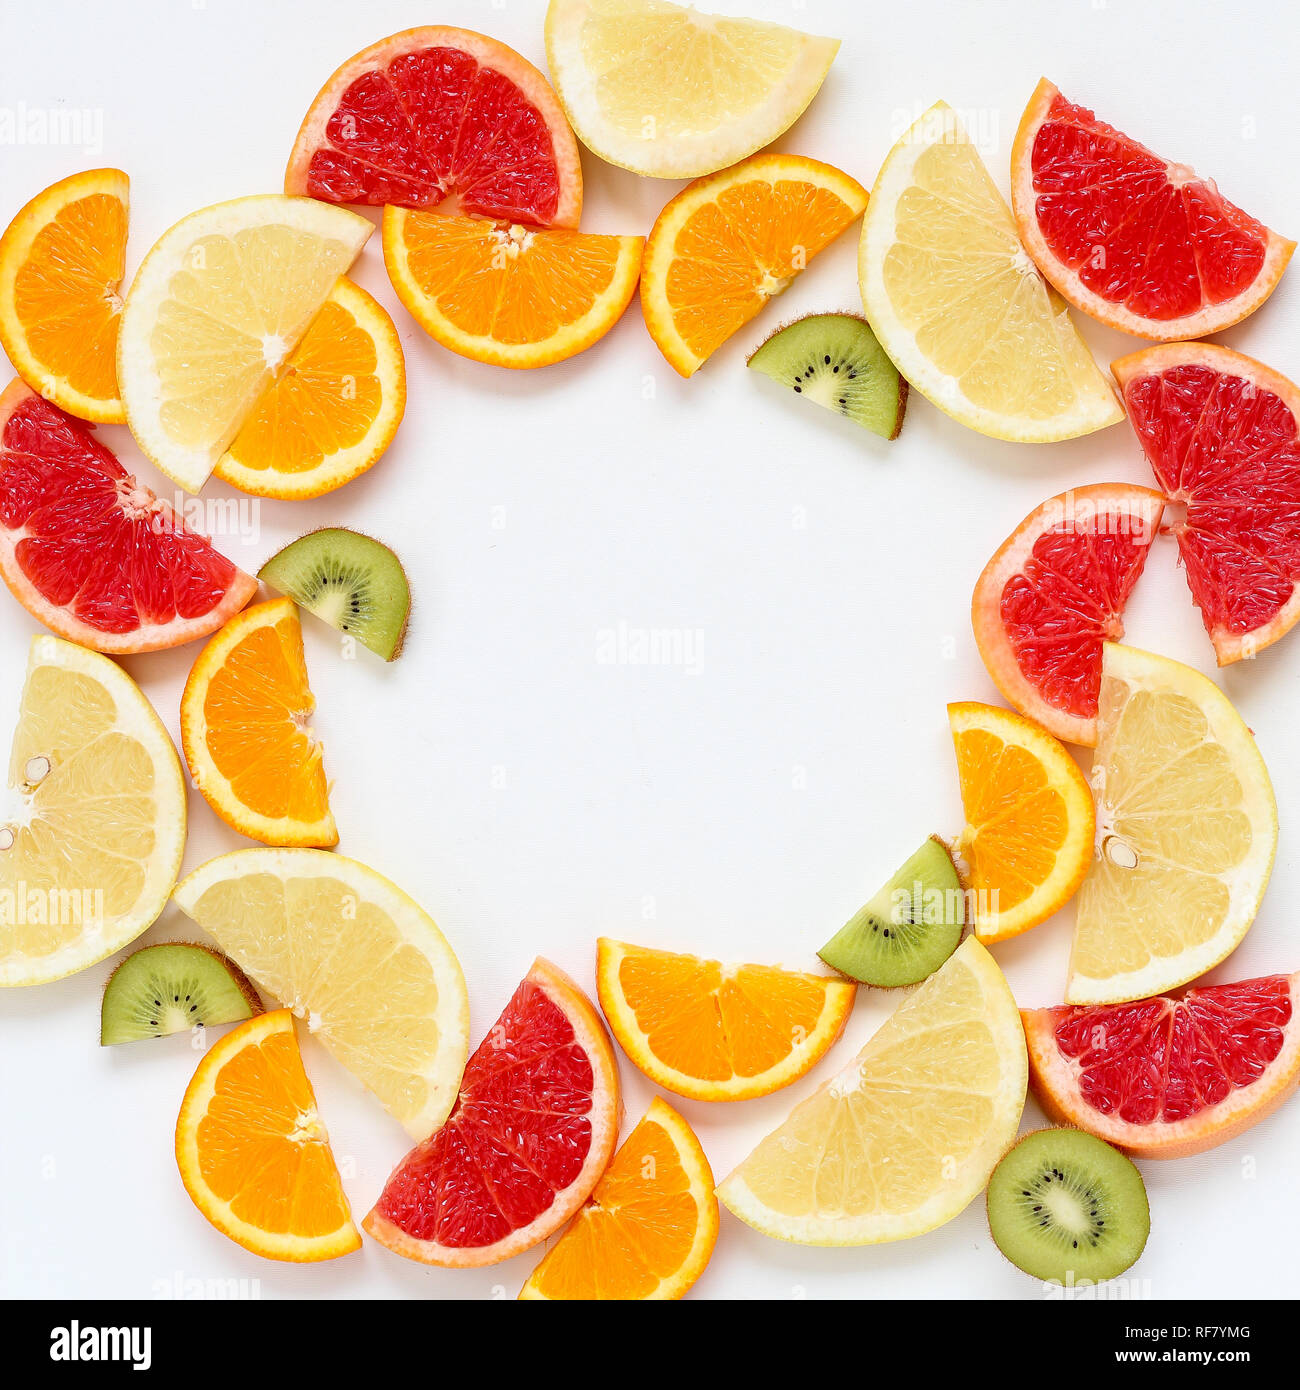 Flat lay of sliced fruits - kiwi, orange and grapefruits - arranged in a circle, copy space in the middle Stock Photo